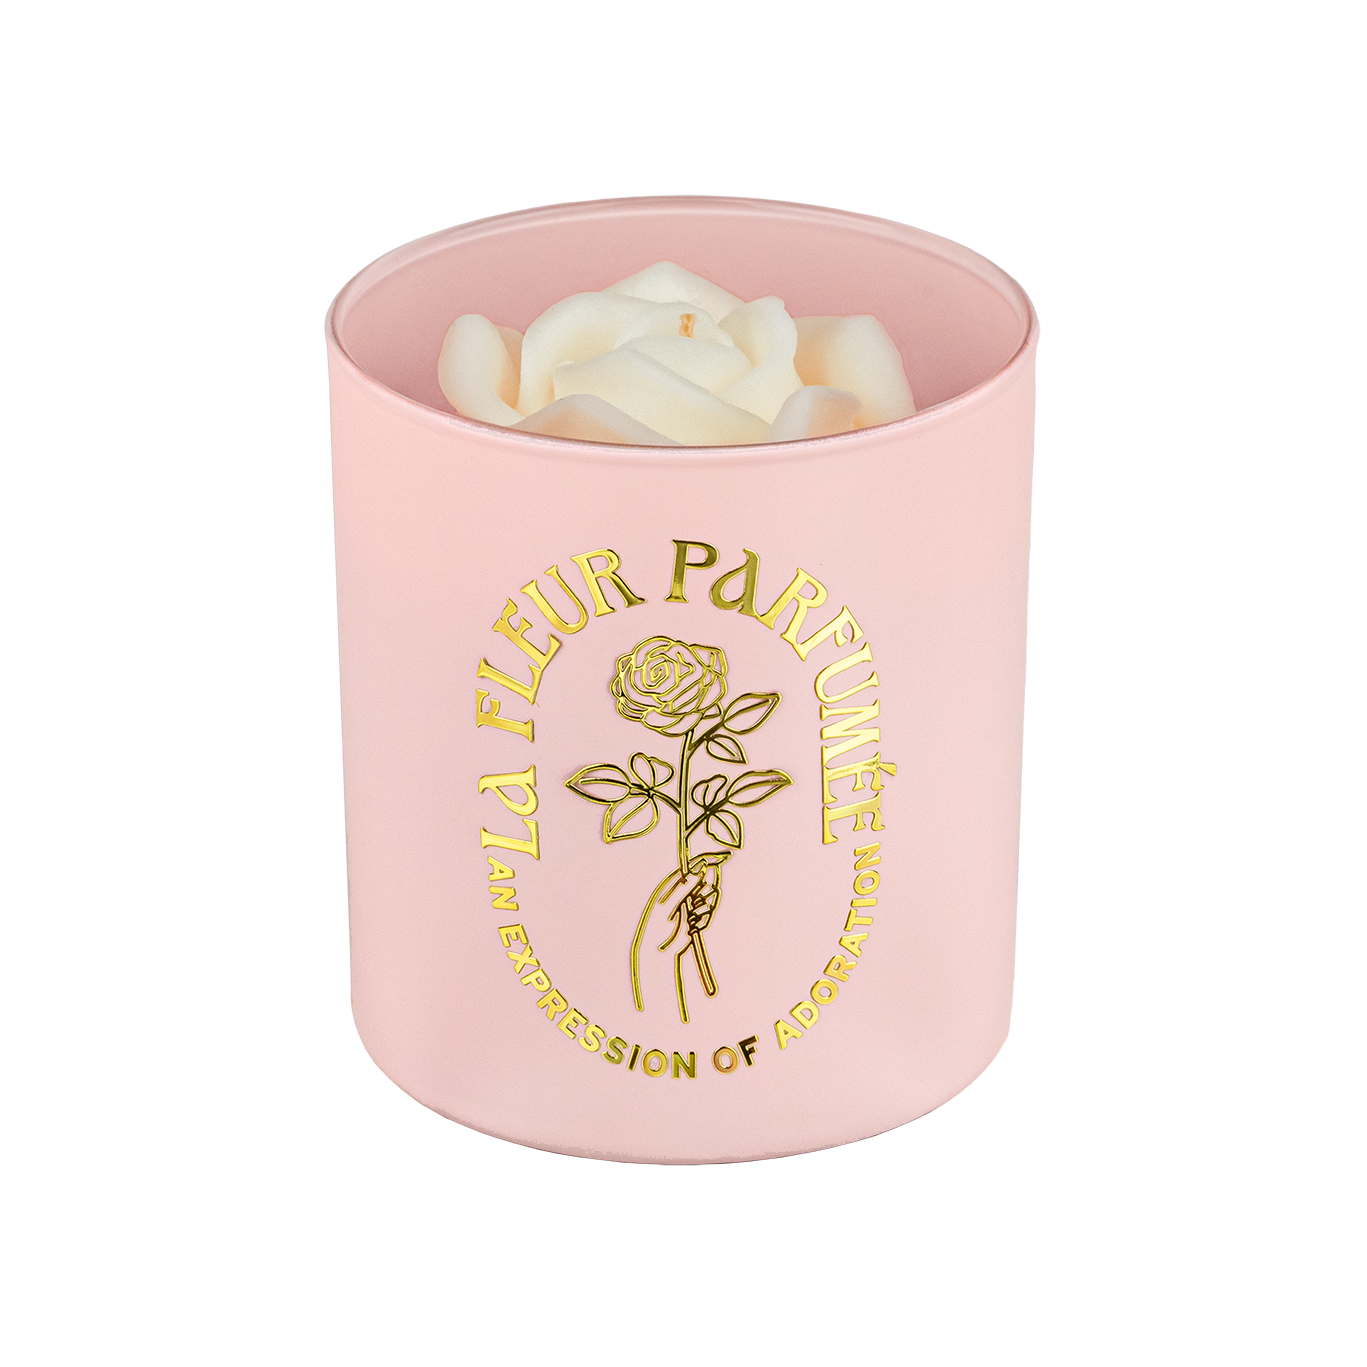 An elegant luxurious light pink candle with a gold emblem that reads La Fleur Parfumée An Expression of Adoration, and is topped with a white sculpted wax rose